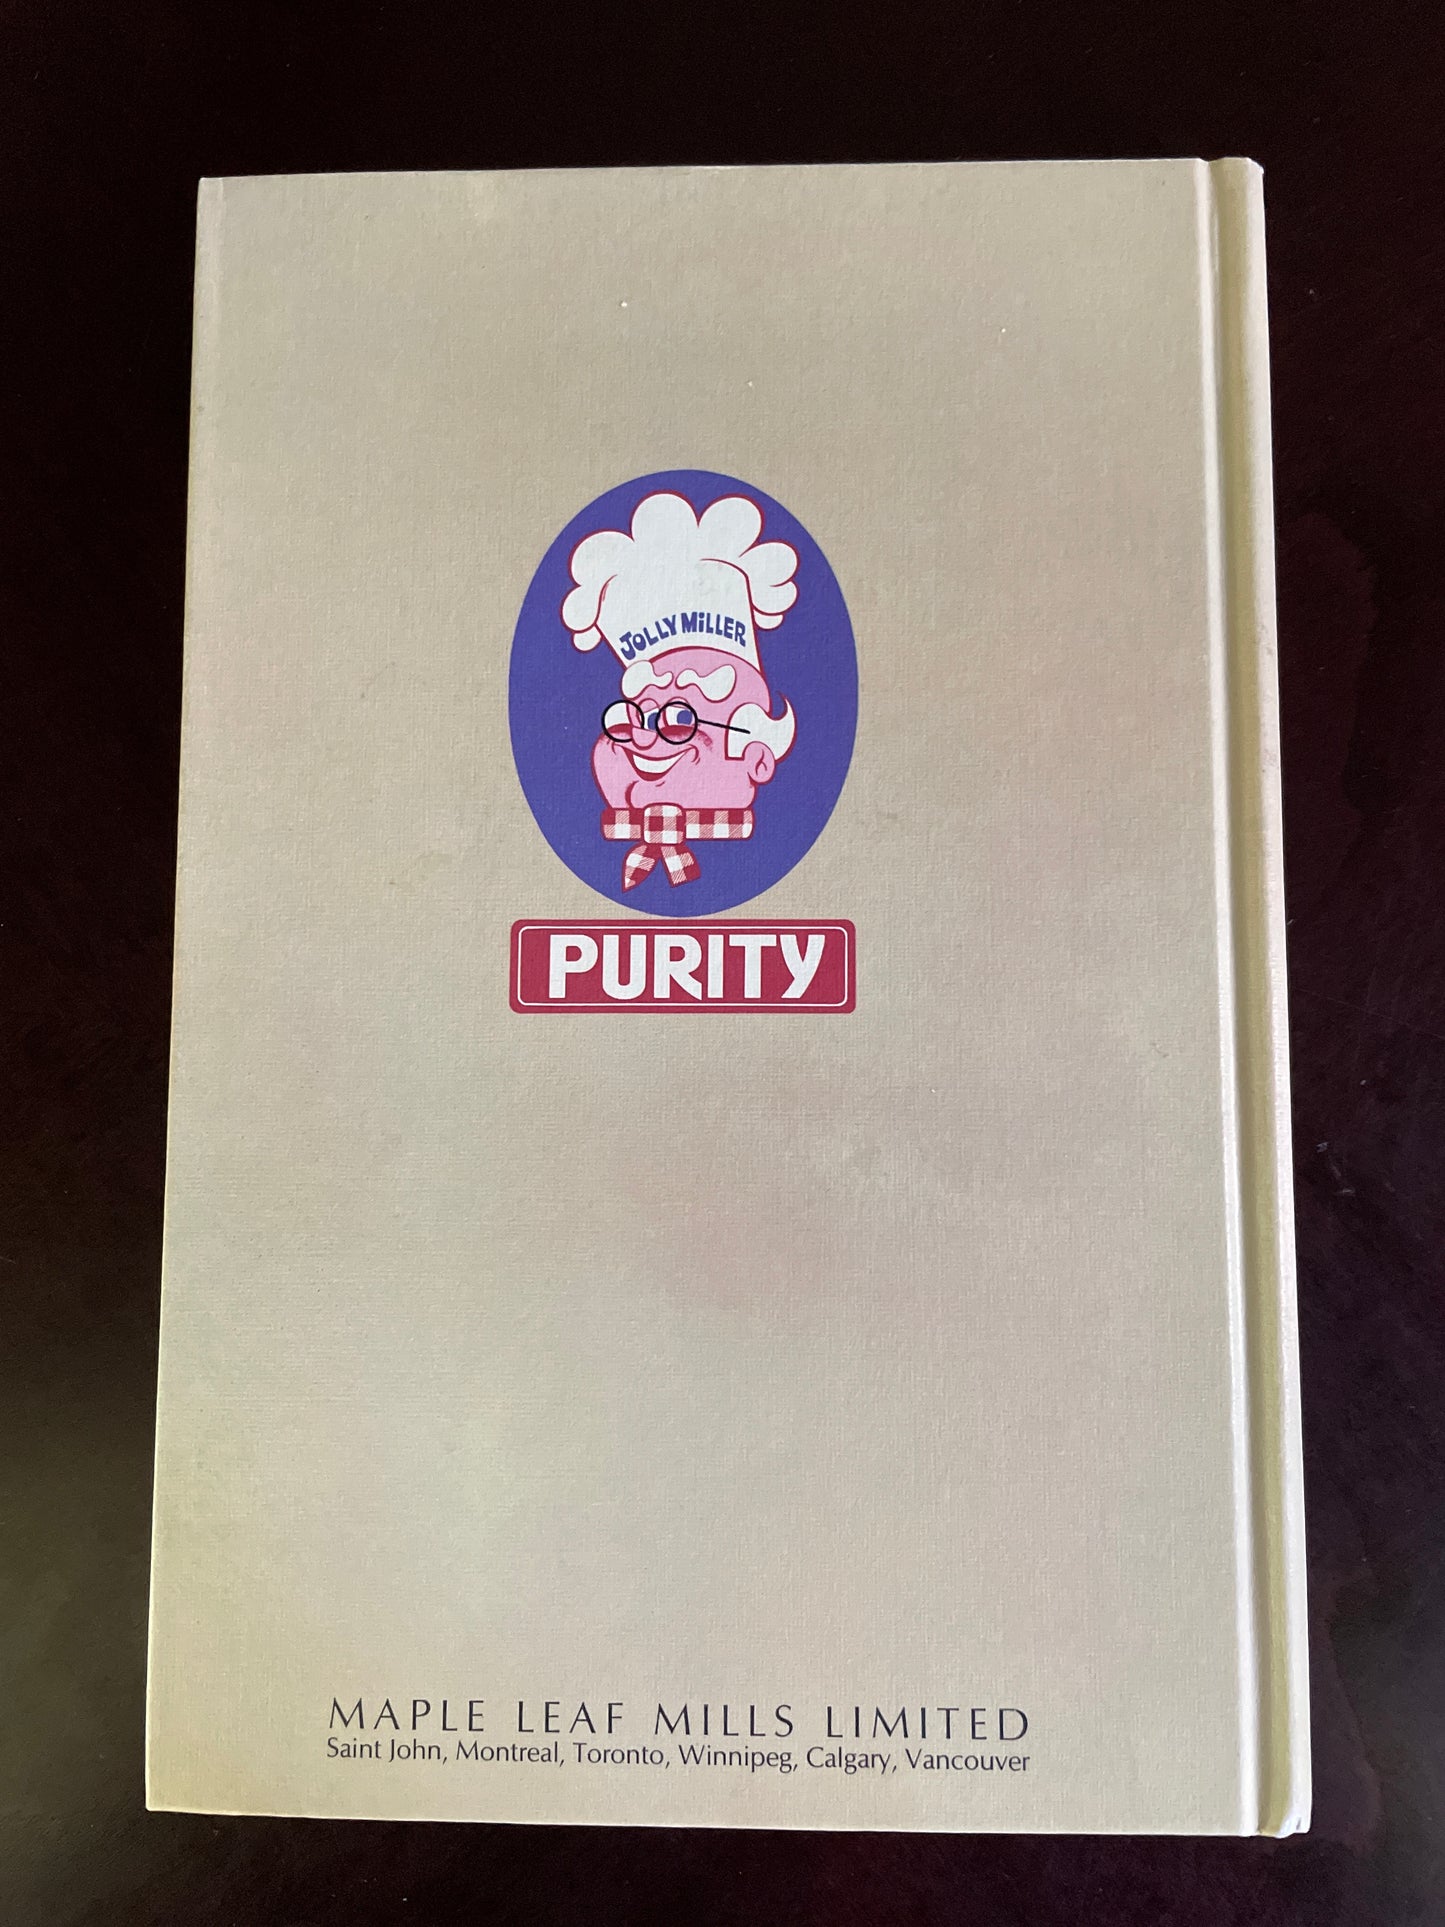 Purity Cook Book: The Complete Guide to Canadian Cooking (Maple Leaf Mills)